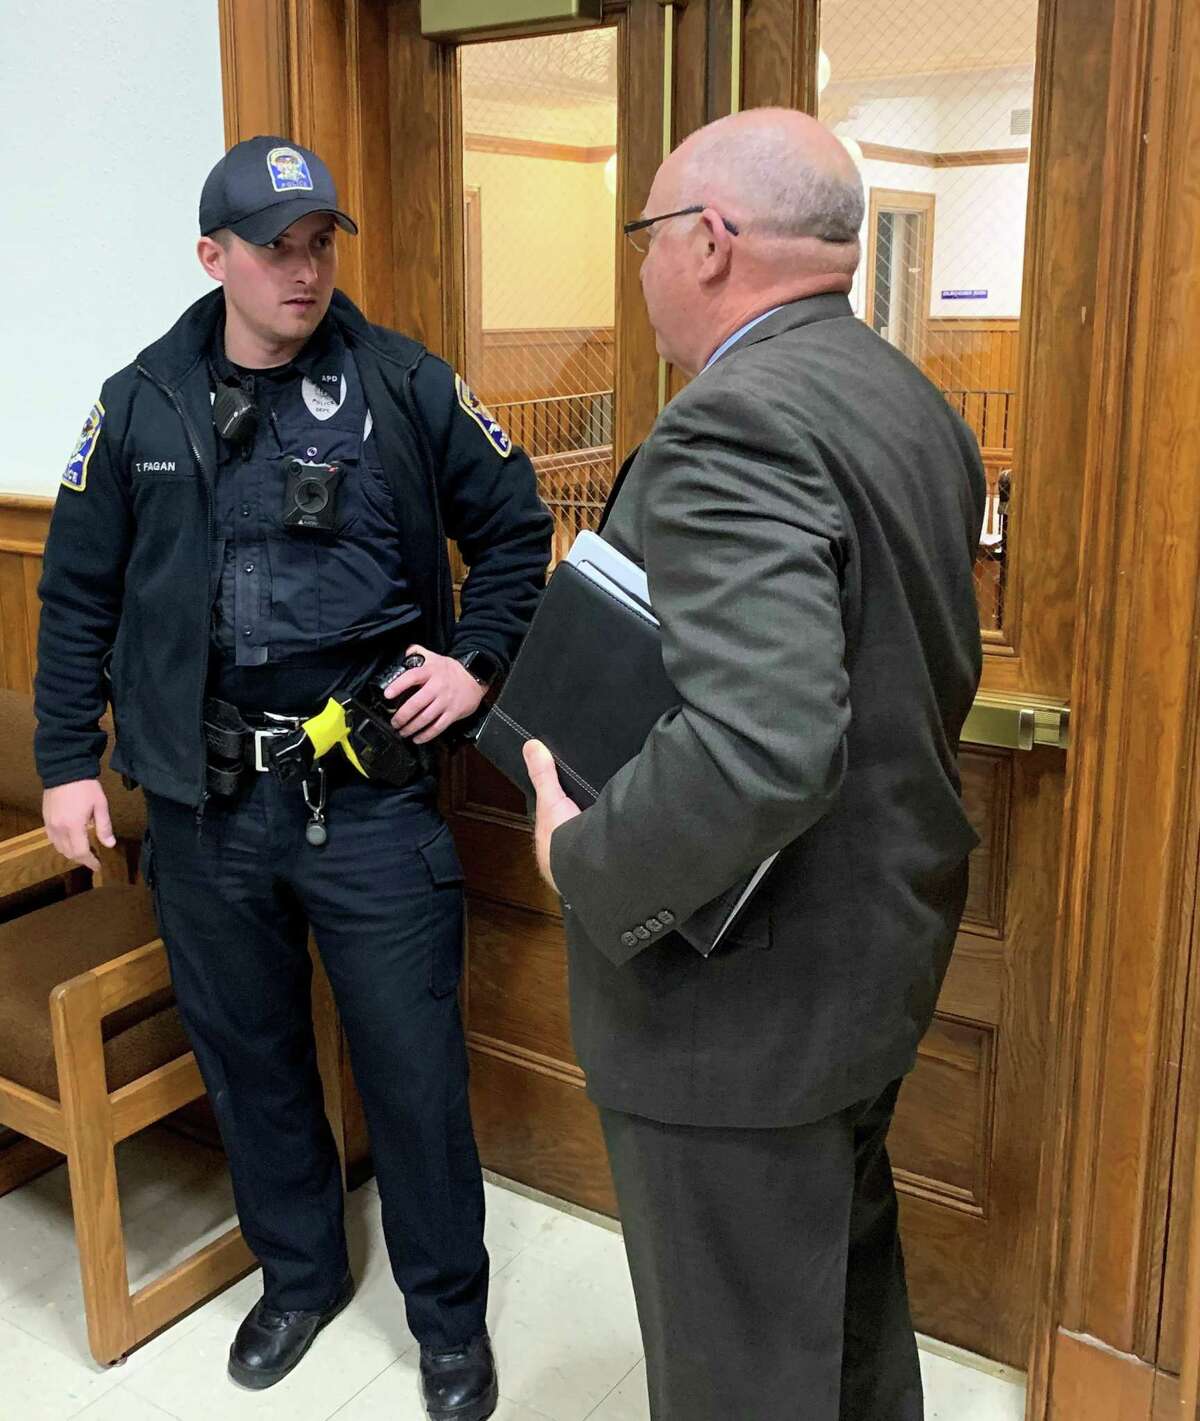 One of the two Ansonia police officers who responded to attorney Fred Dorsey’s call to have Mayor David Cassetti removed talks to the school board lawyer. Dorsey declined time file a complaint because the mayor had left after adjourning the meeting.